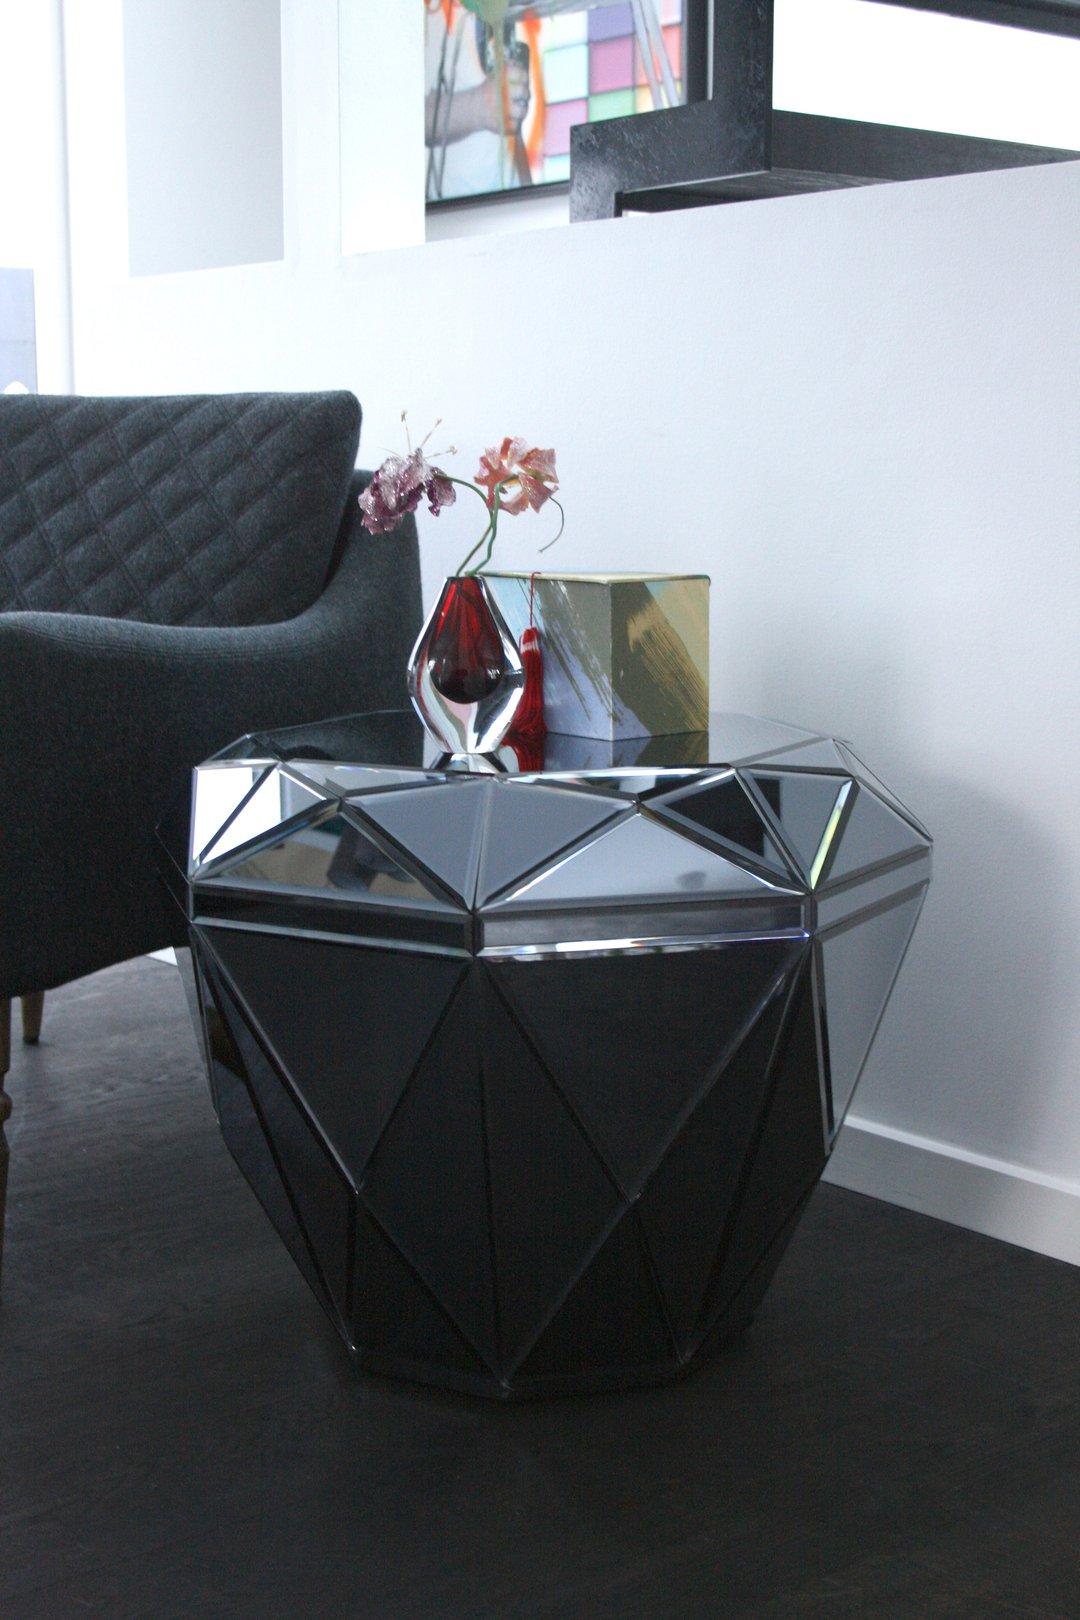 Diamond Midnight Coffee Table 
Table
Measure: 4mm faceted mirror on black painted mdf
L 55 x H 45 x D 55cm

With its sleek, mirrored surface, you won't be able to take your eyes off a Diamond Table. Give your space a unique edge with this modern